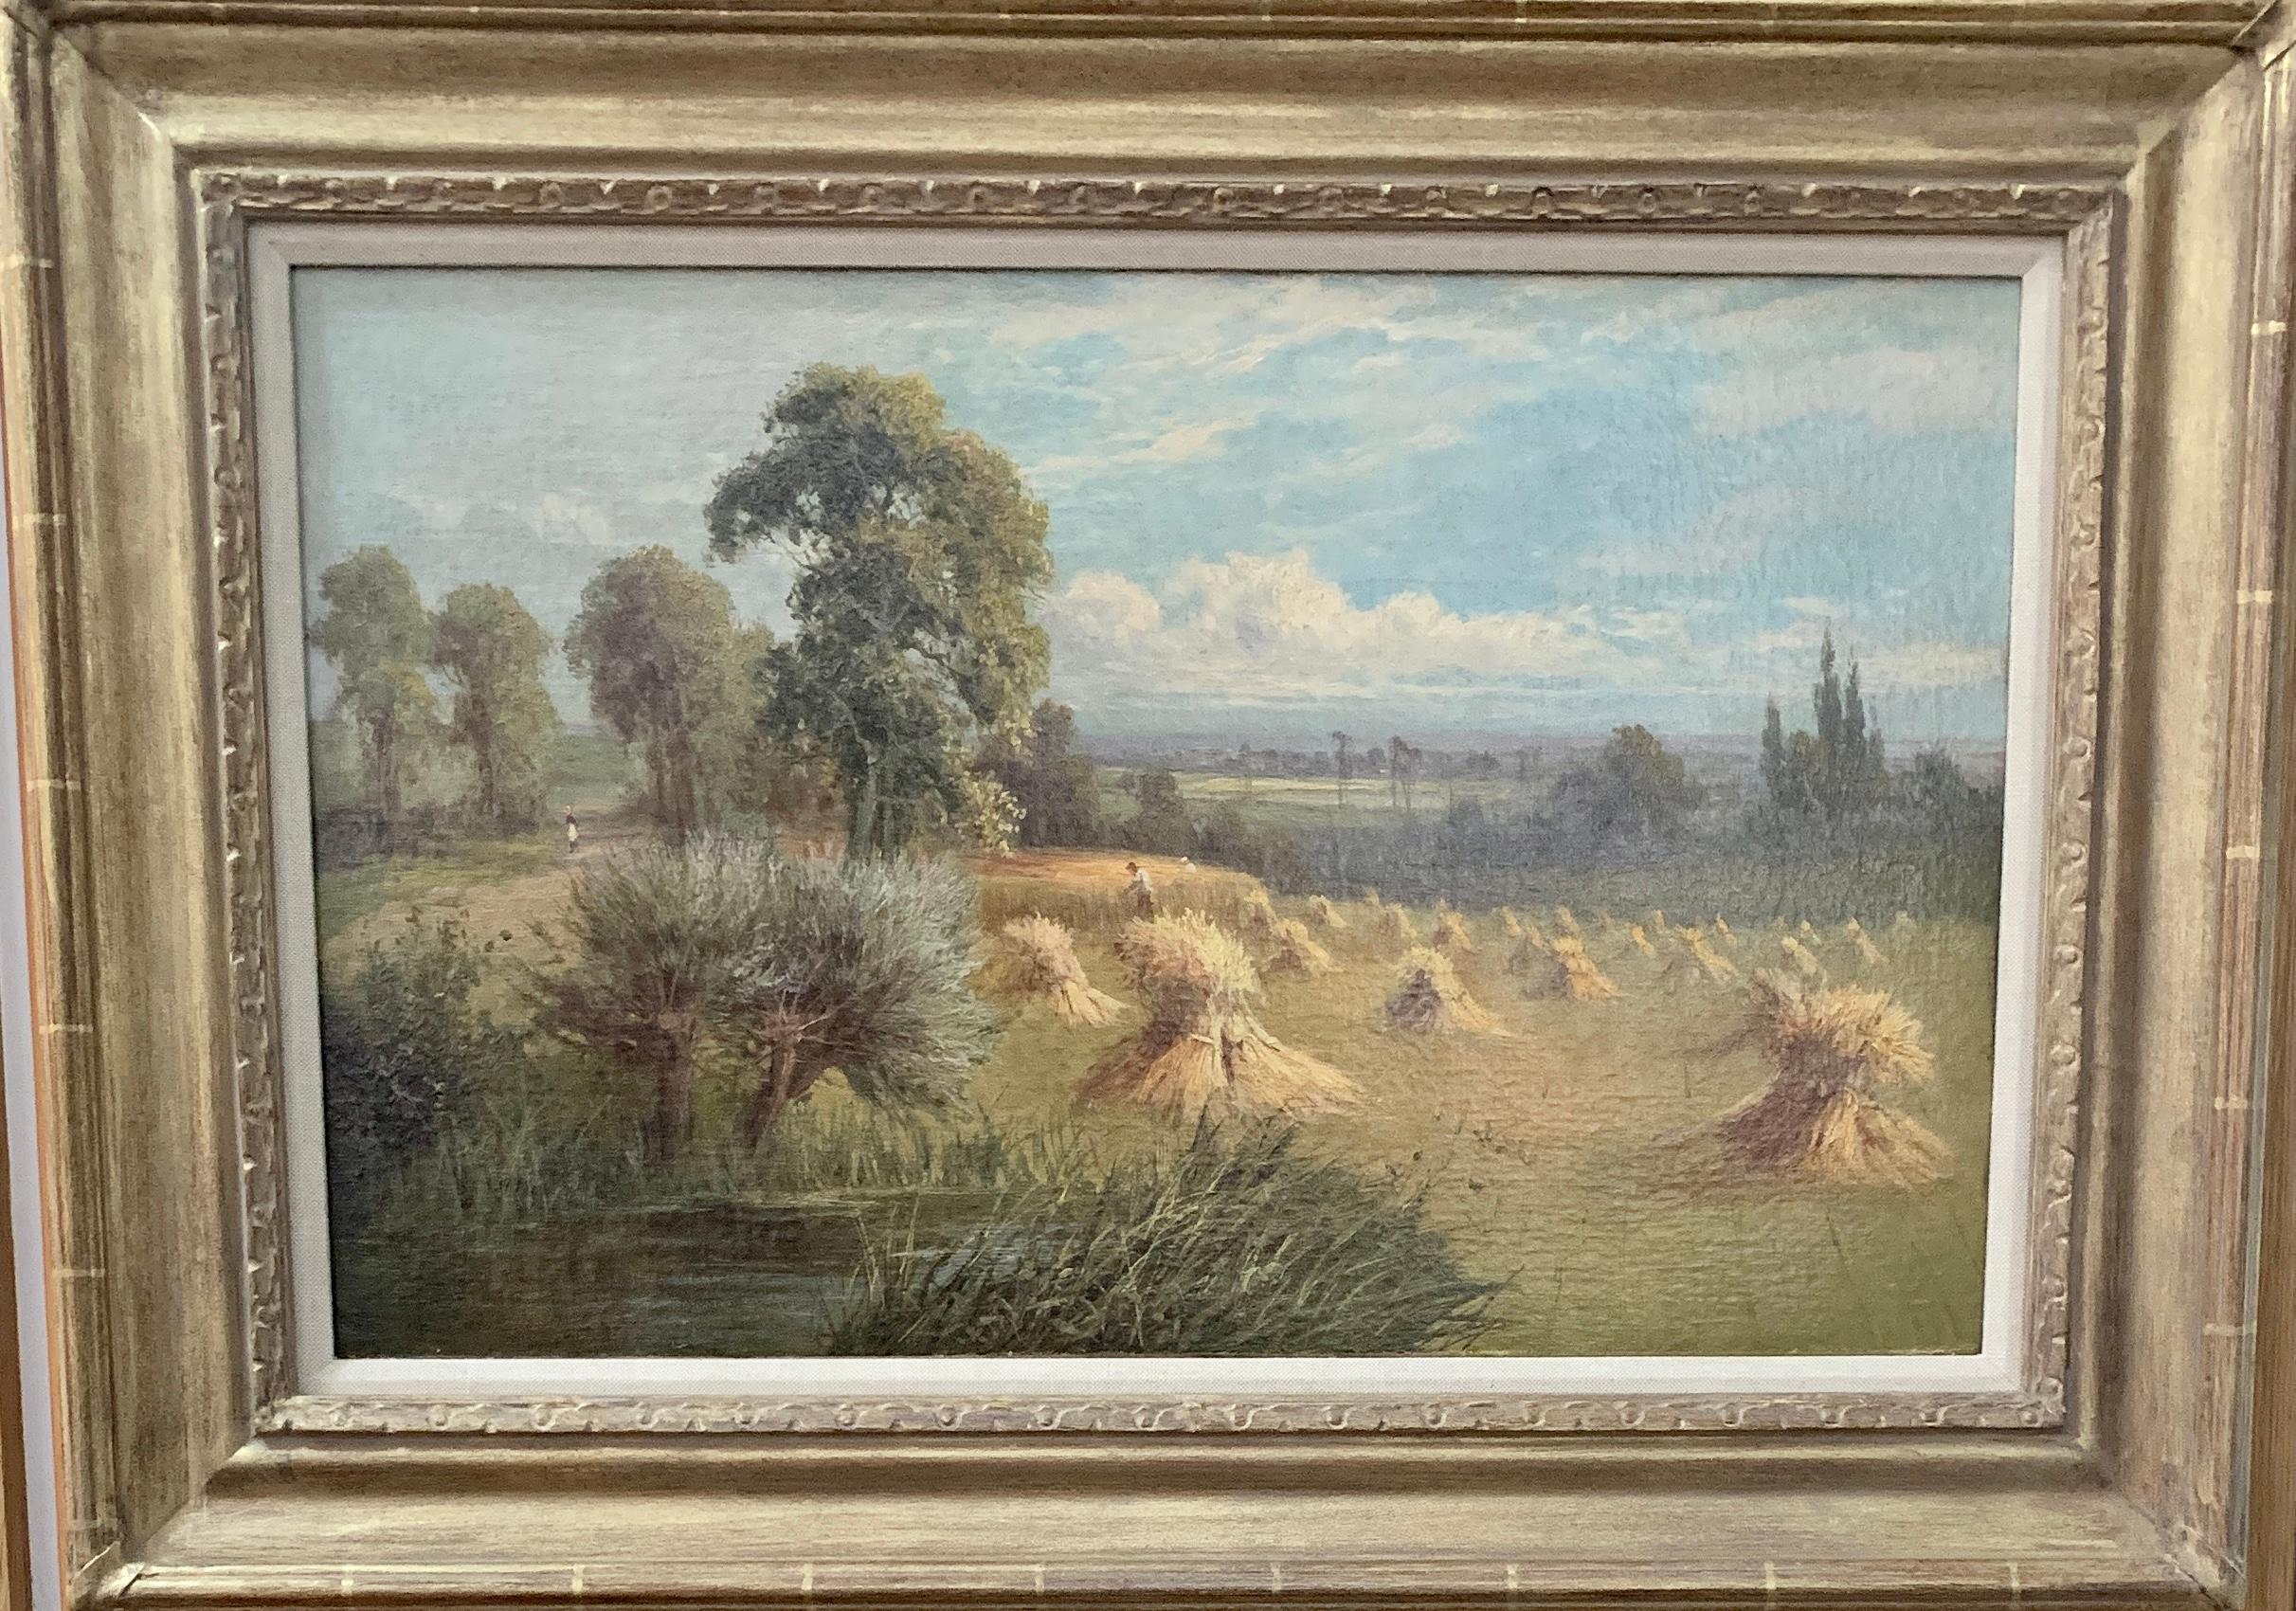 English 19th century landscape with farmers harvesting the hay, pond and Willow. - Painting by Sidney Yates Johnson